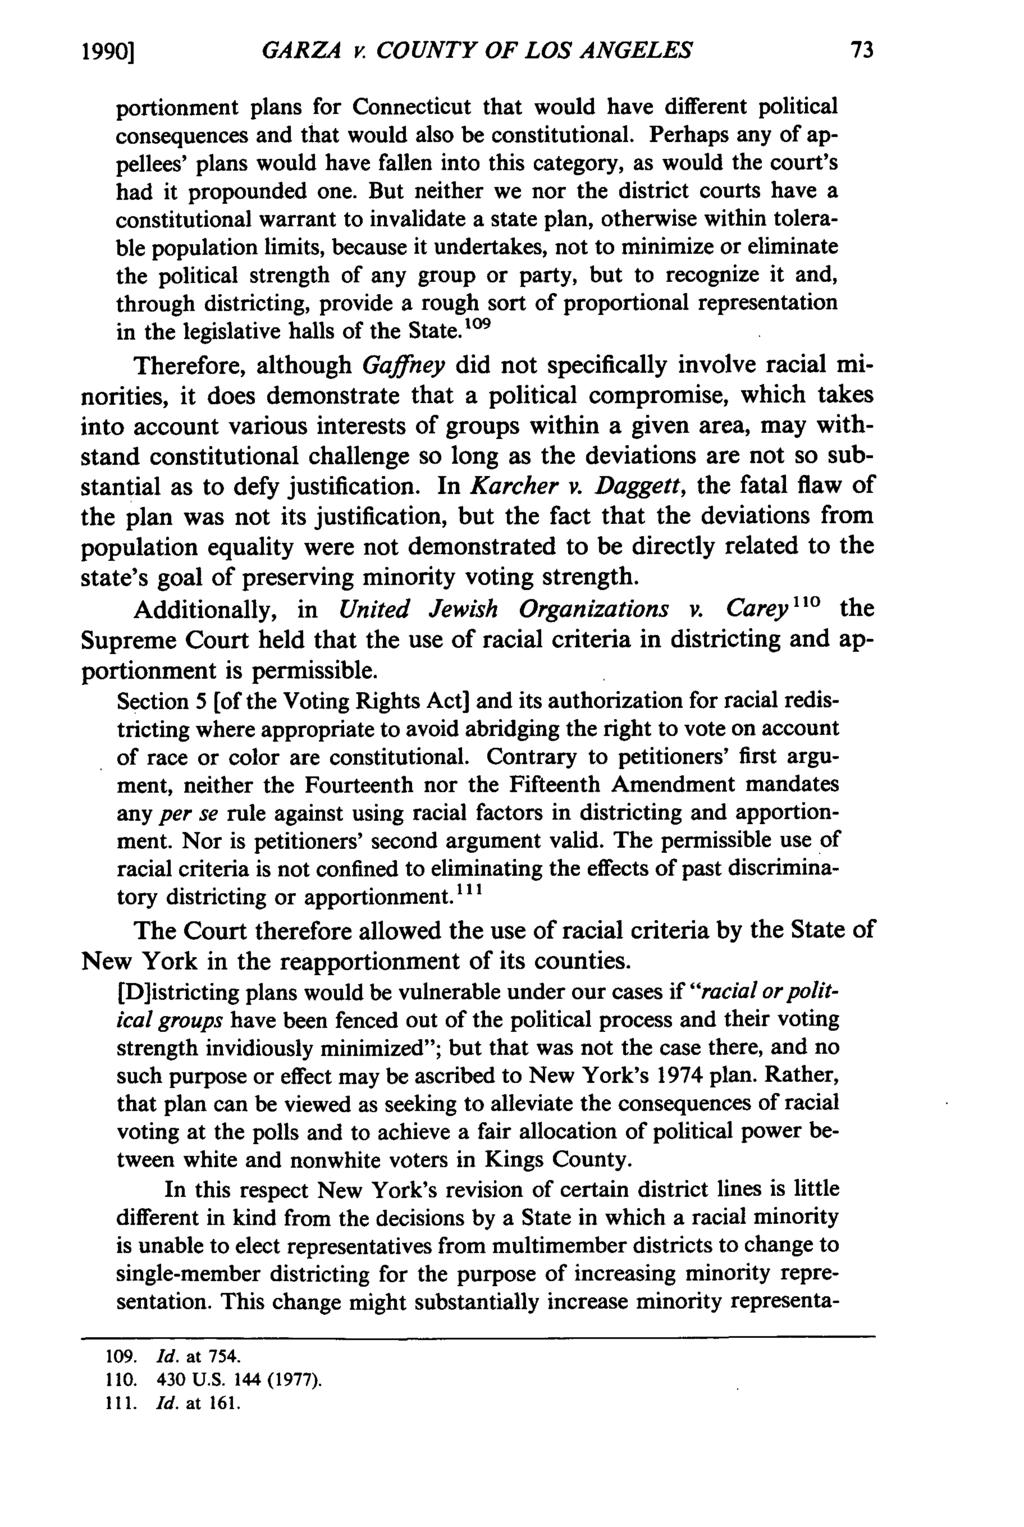 1990] GARZA v. COUNTY OF LOS ANGELES portionment plans for Connecticut that would have different political consequences and that would also be constitutional.